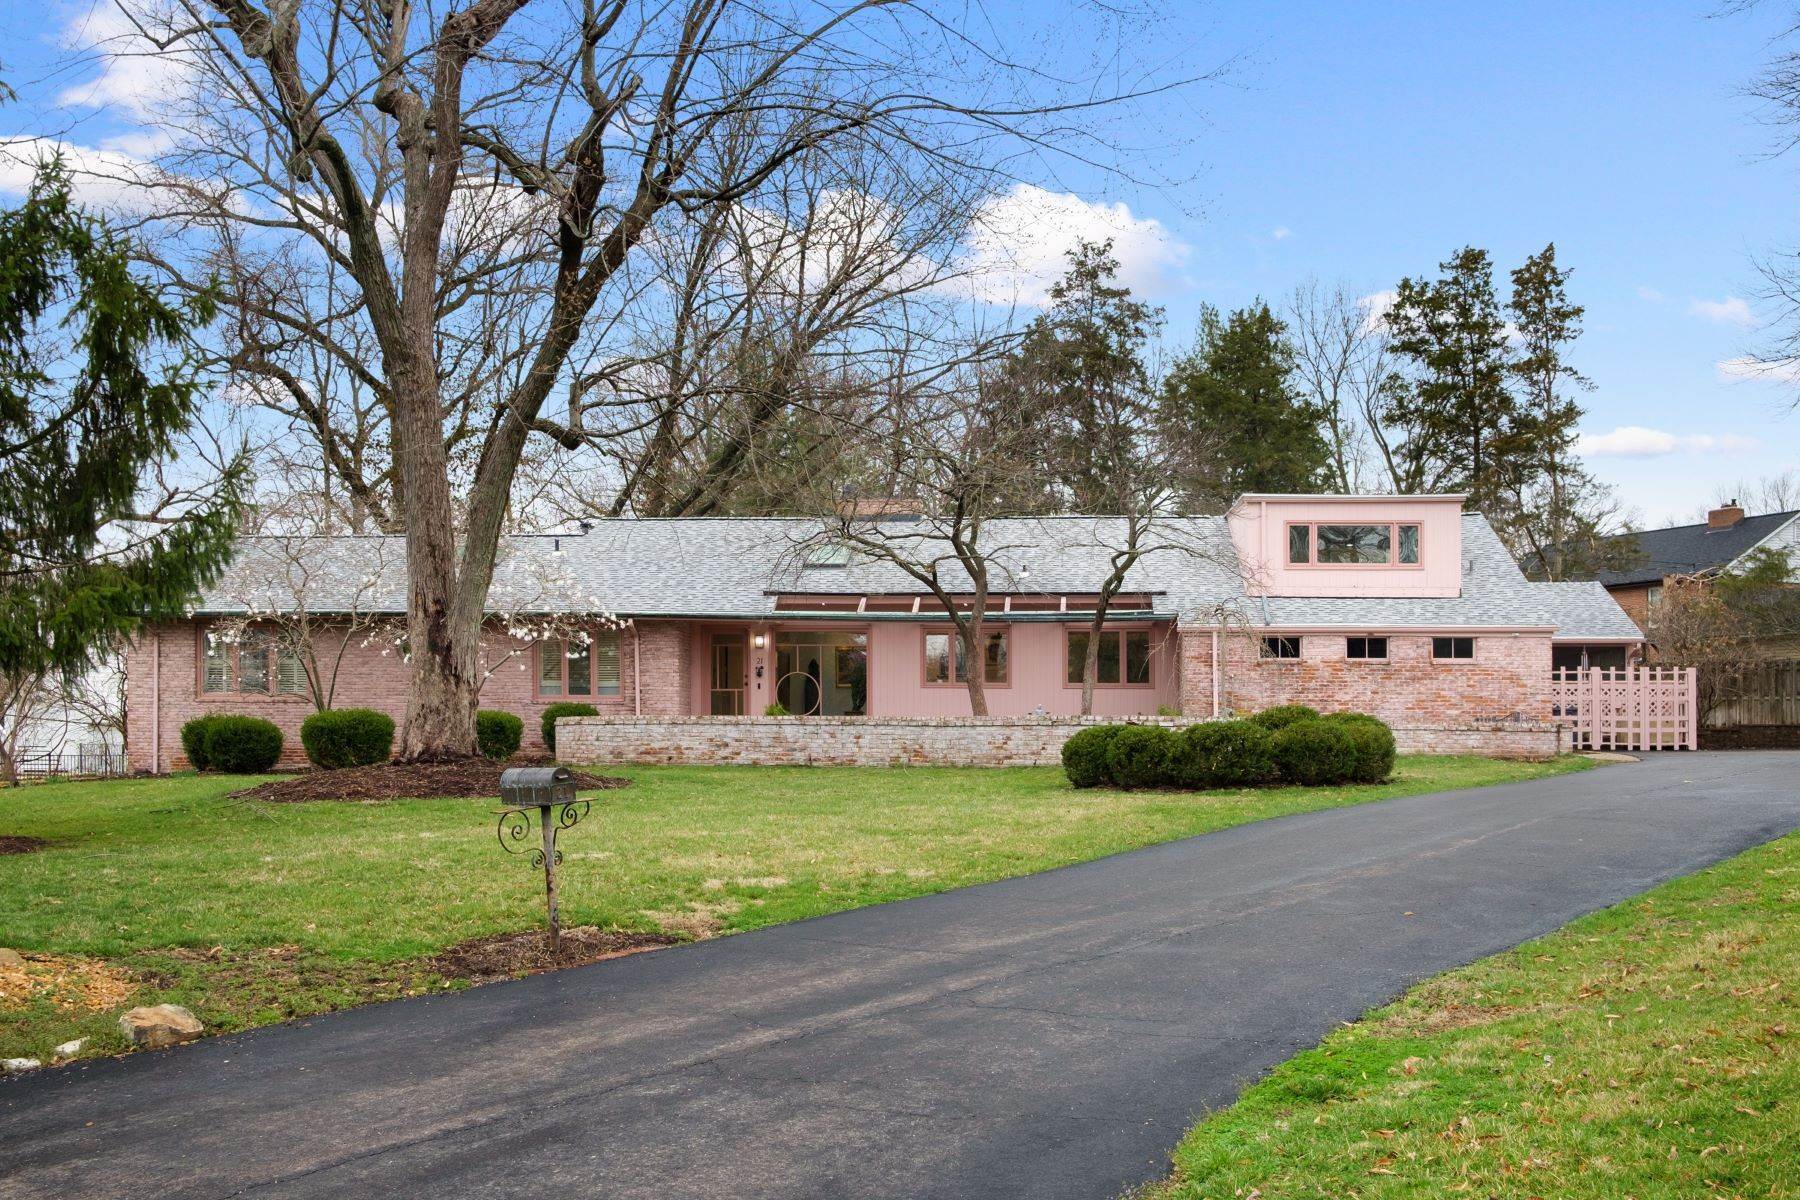 Single Family Homes for Sale at Mid-Century Modern Home in Ladue 21 Paxton Lane Ladue, Missouri 63124 United States